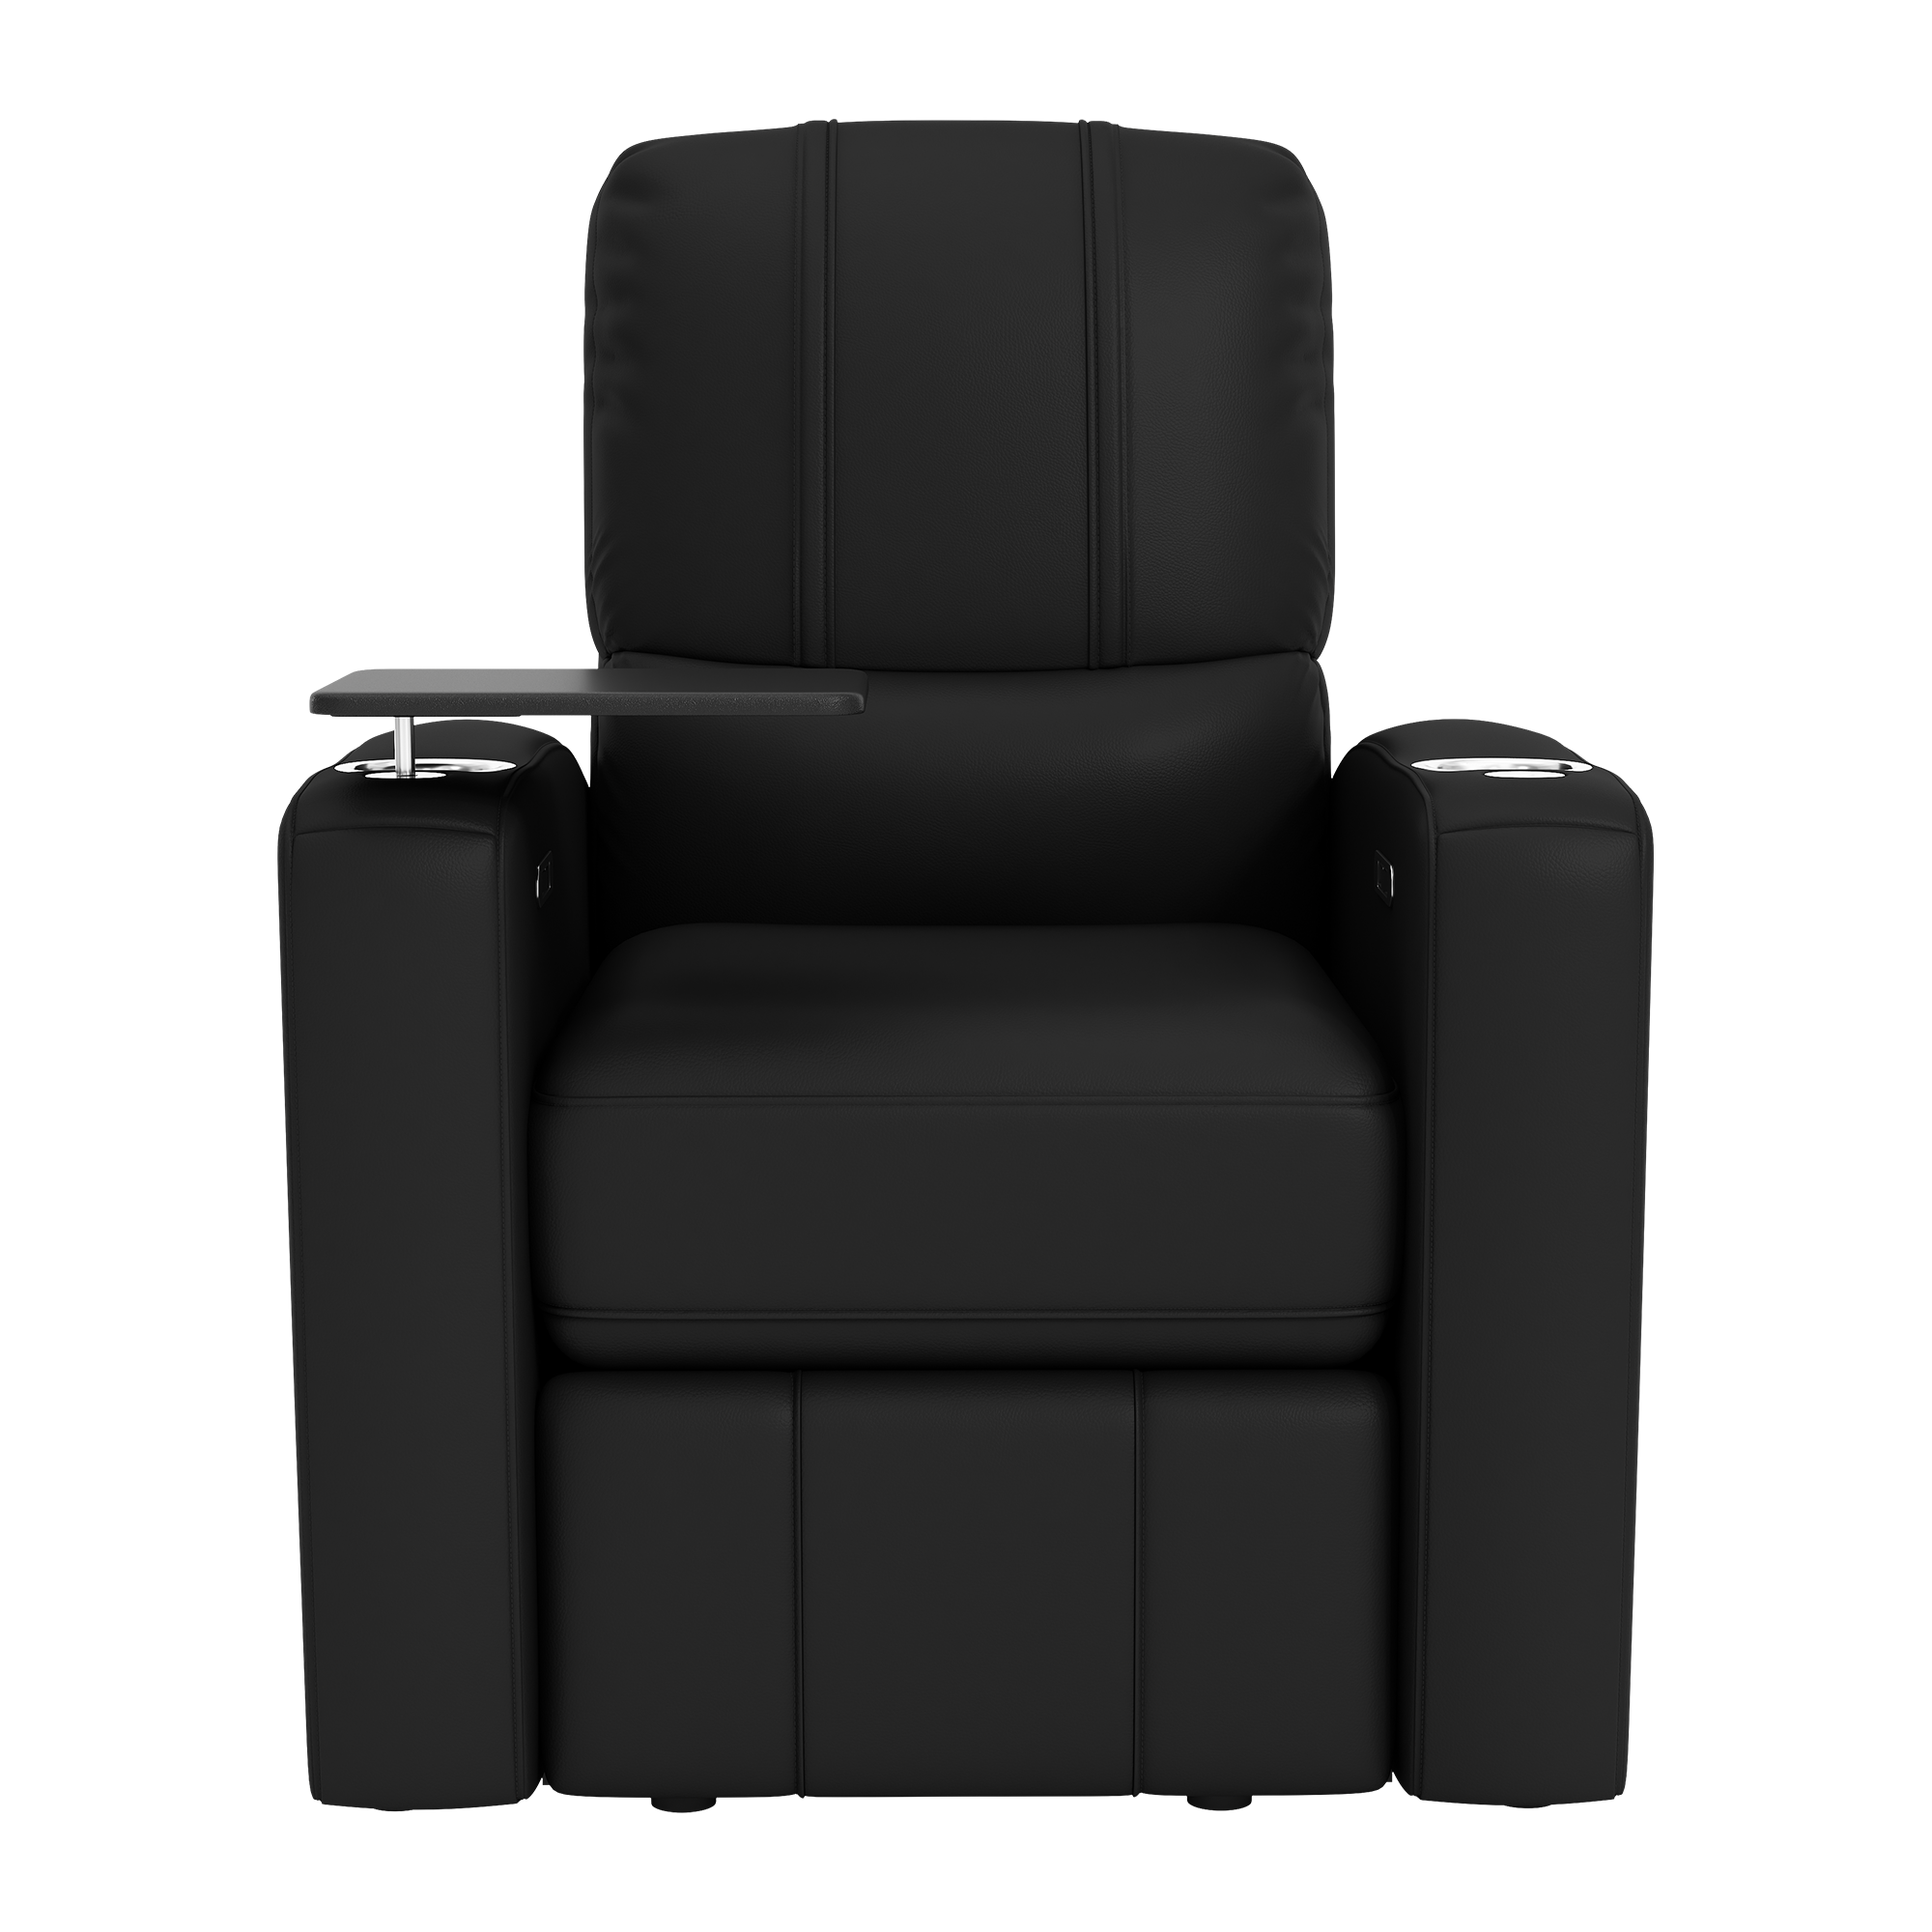 Stealth Power Plus Recliner with Toronto Blue Jays Cooperstown